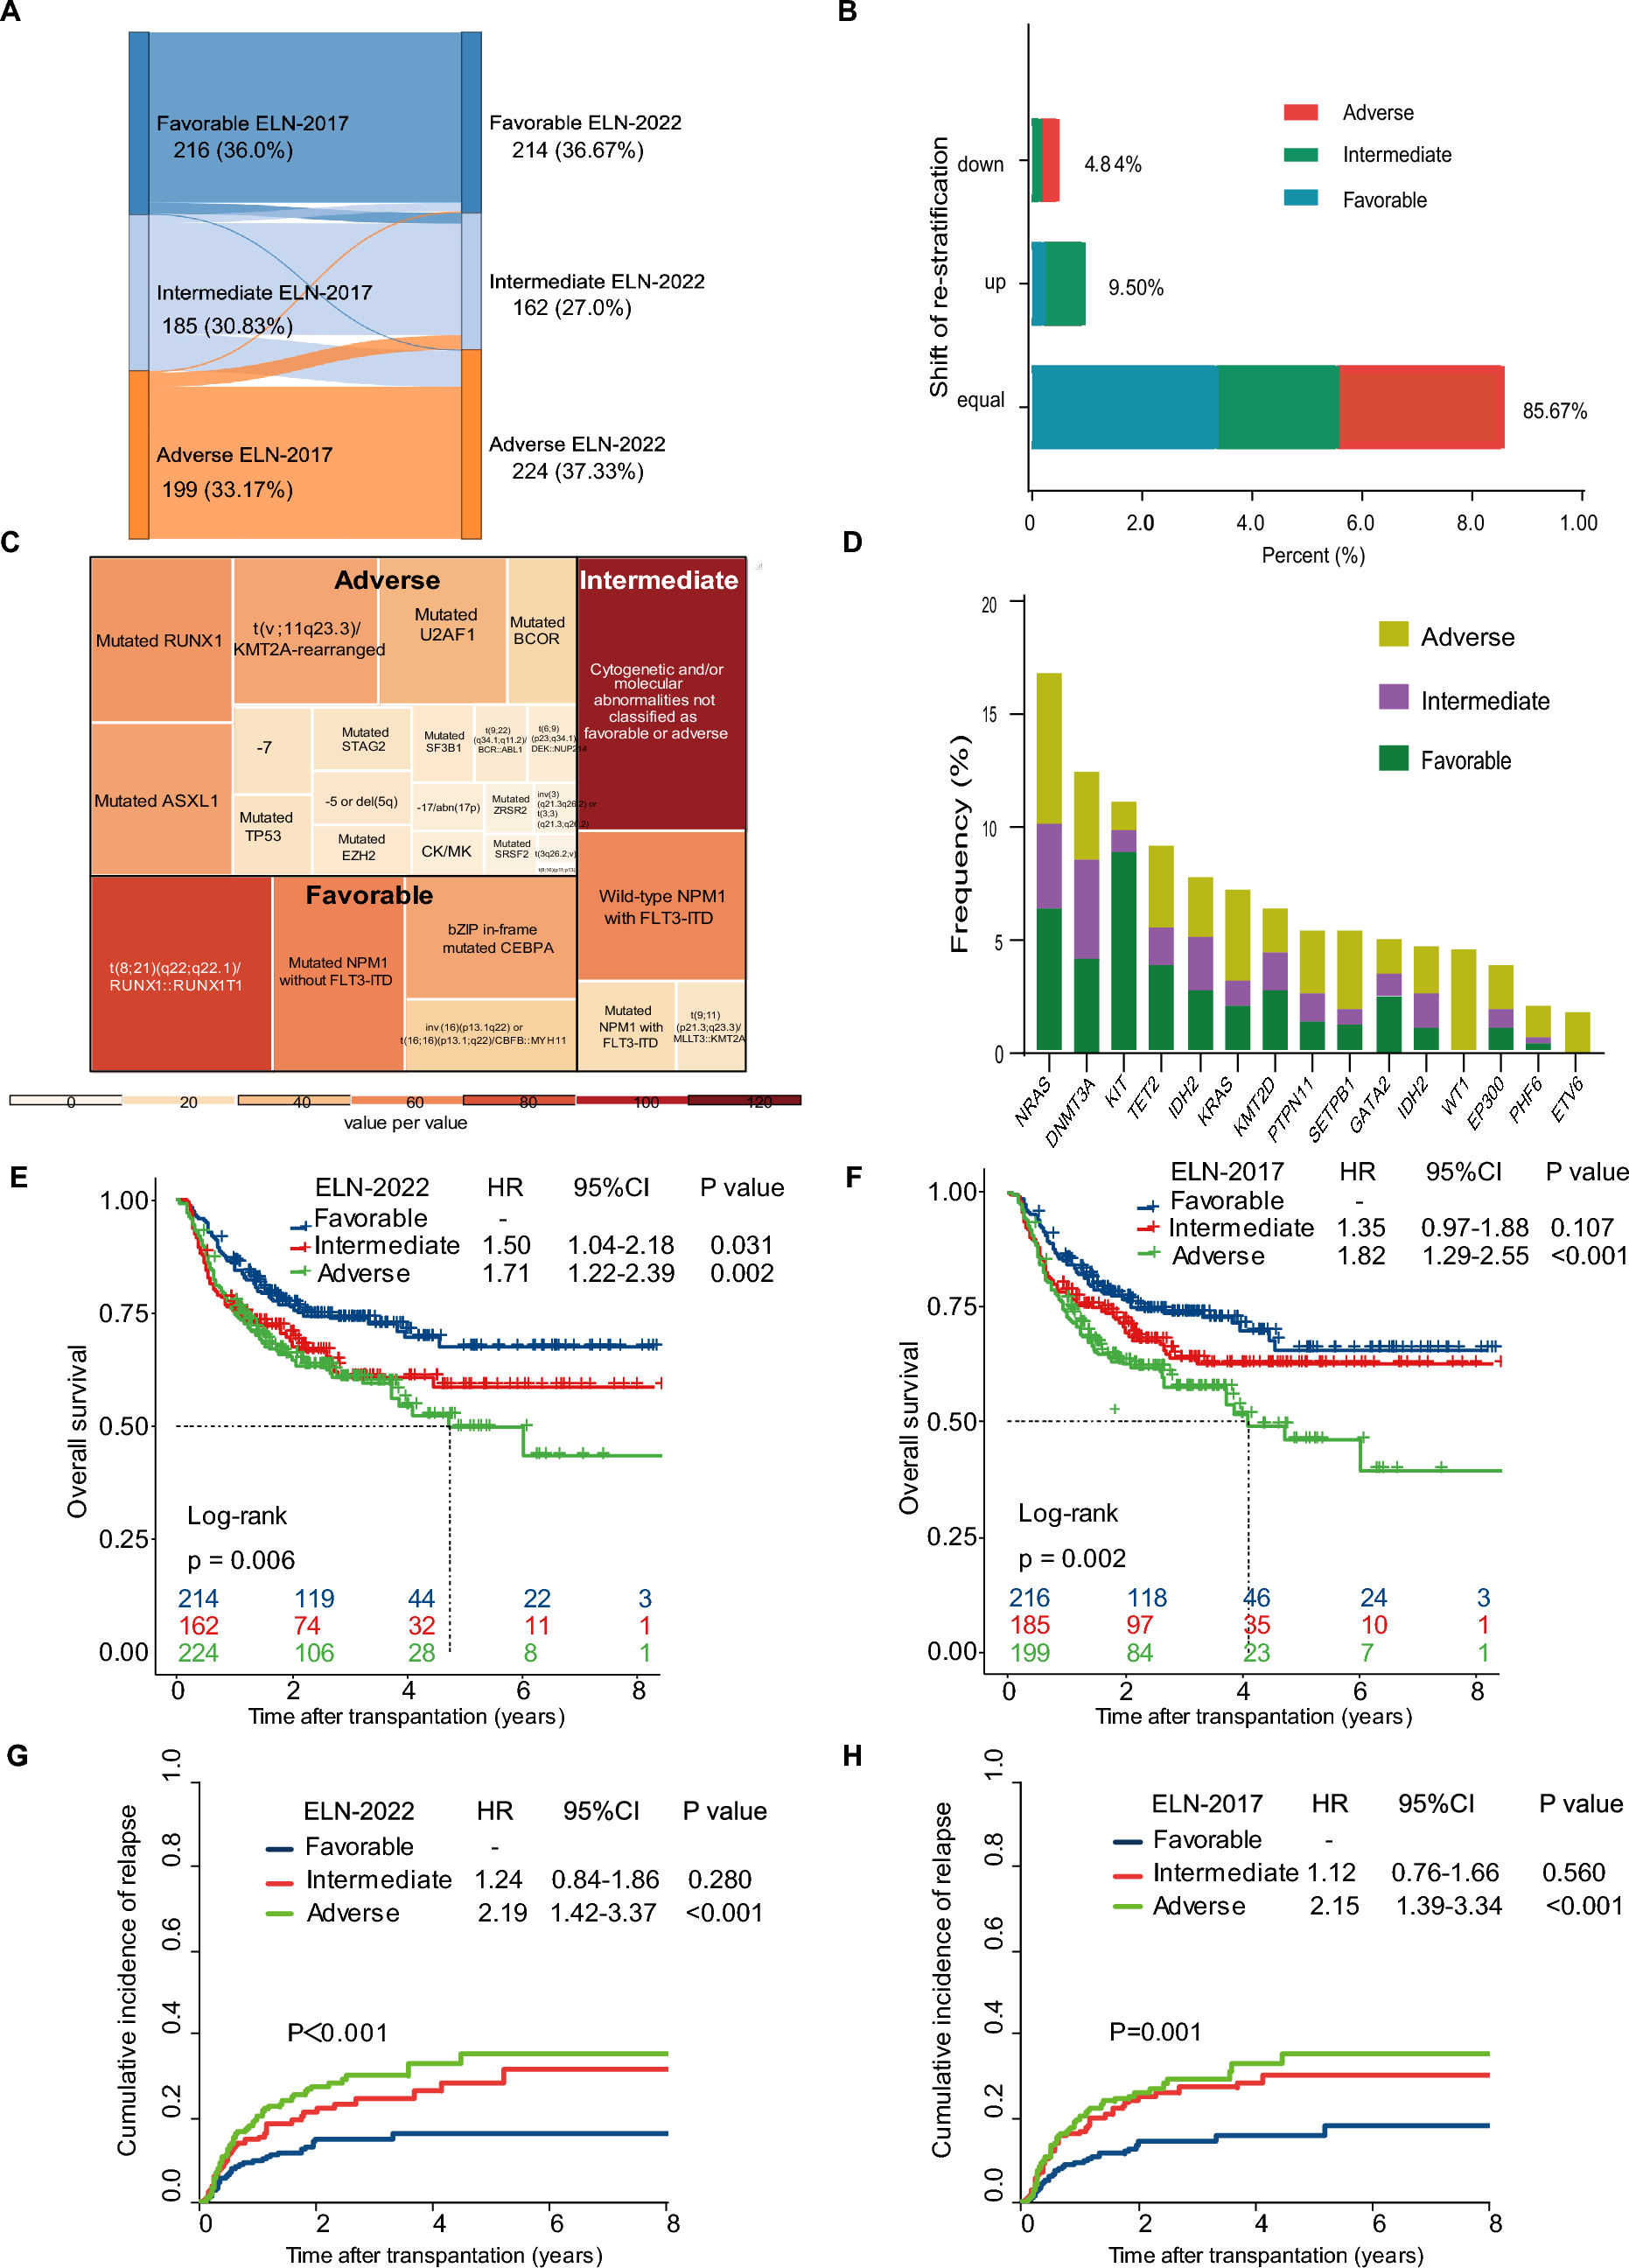 Outcomes of acute myeloid leukemia patients undergoing allogeneic hematopoietic stem cell transplantation: validation, comparison and improvement of 2022 ELN genetic risk system